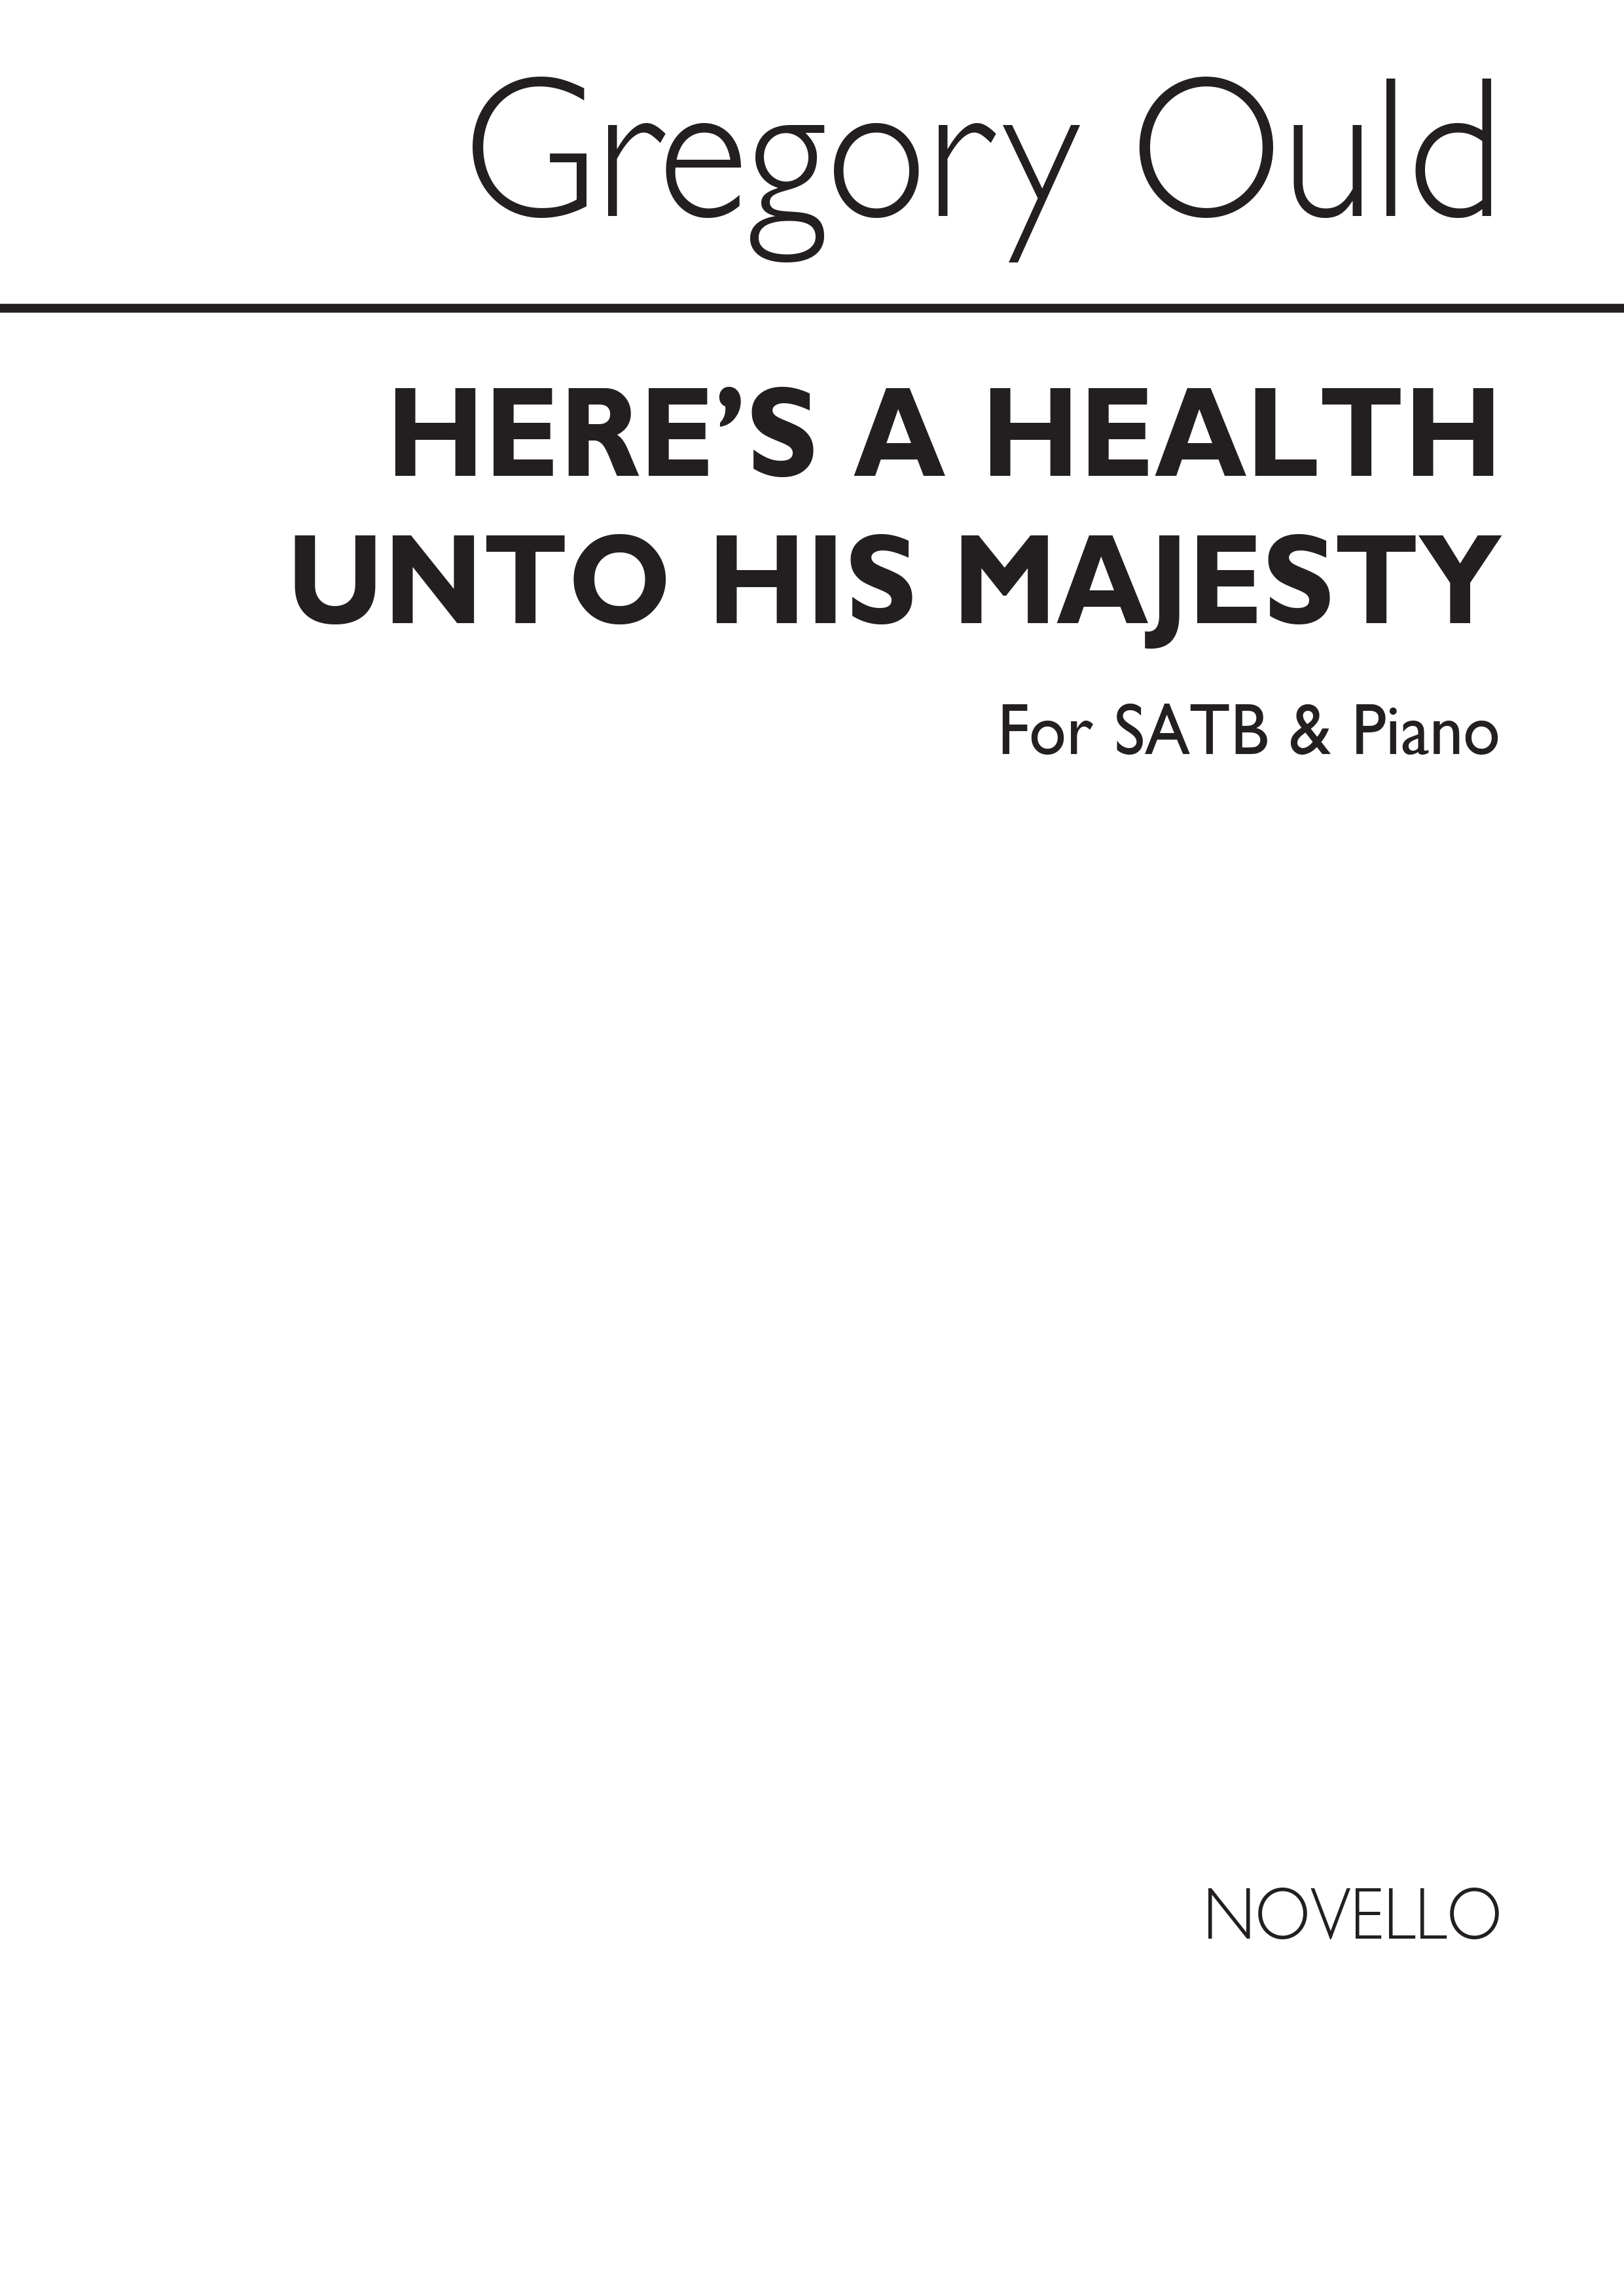 Gregory Ould: Here's A Health Unto His Majesty SATB